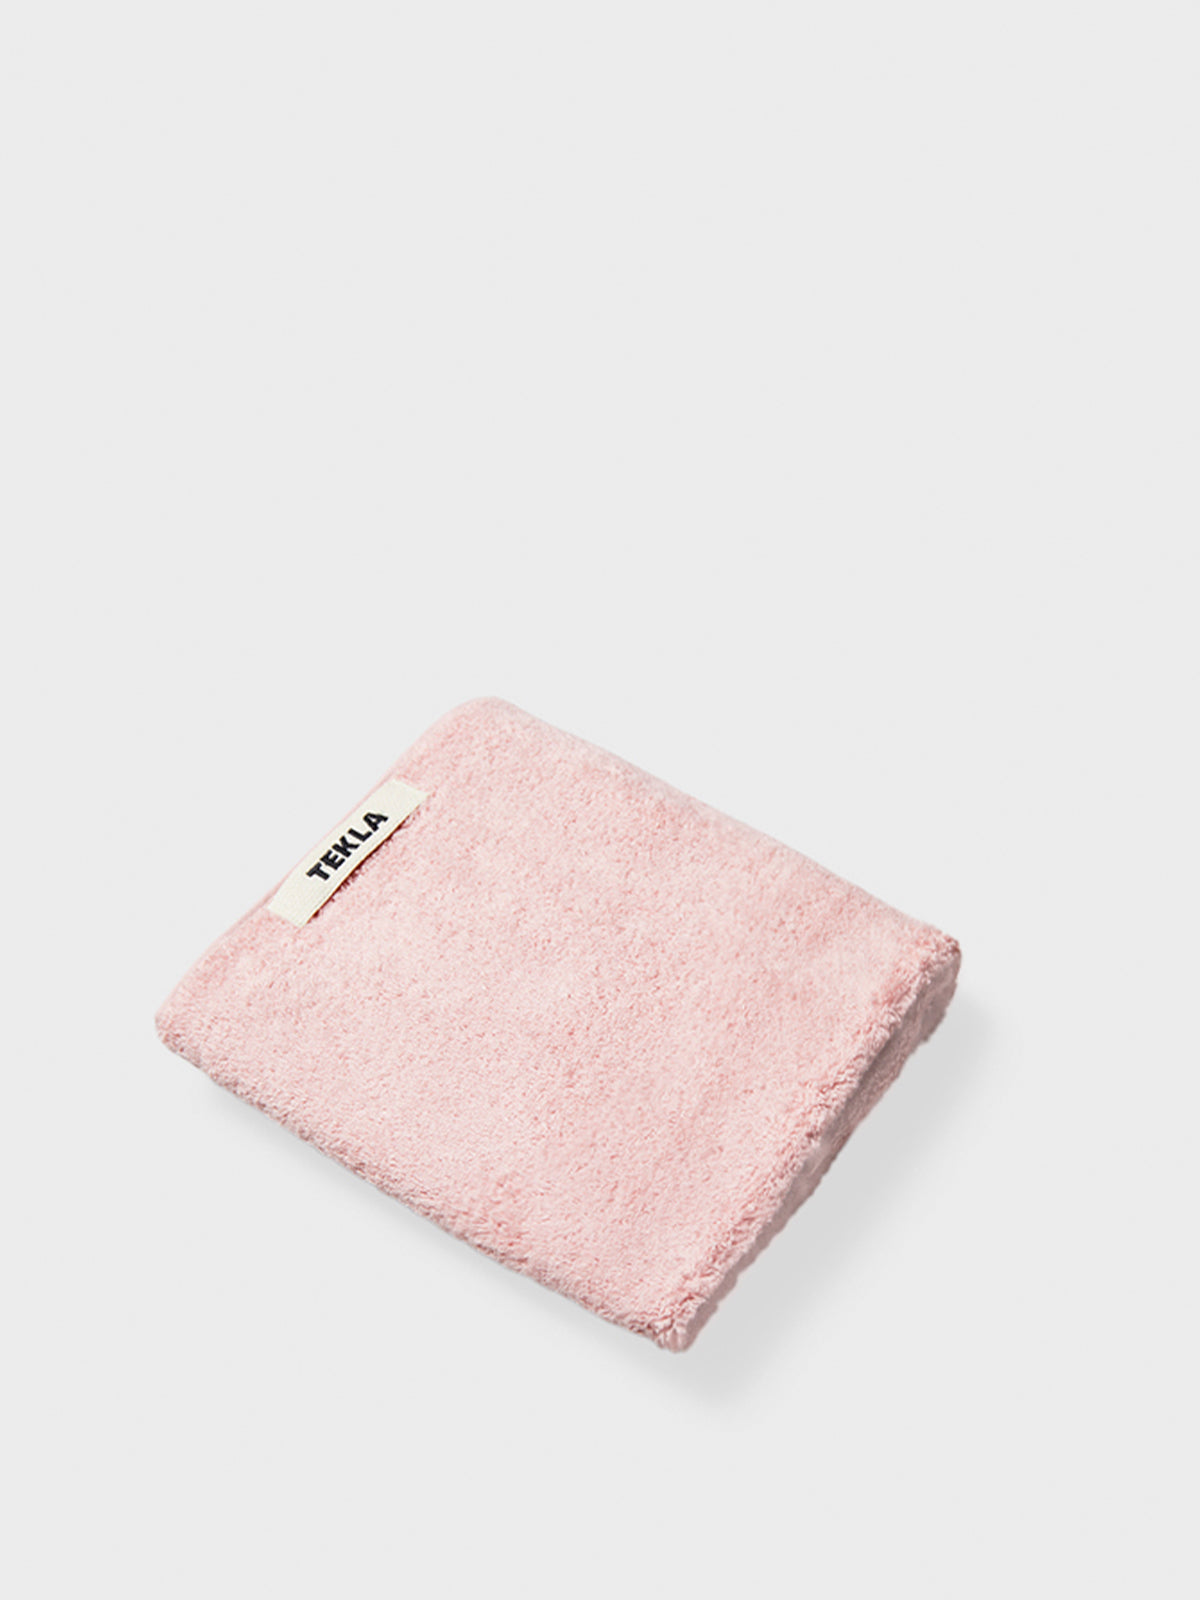 Tekla - Hand Towel in Shaded Pink